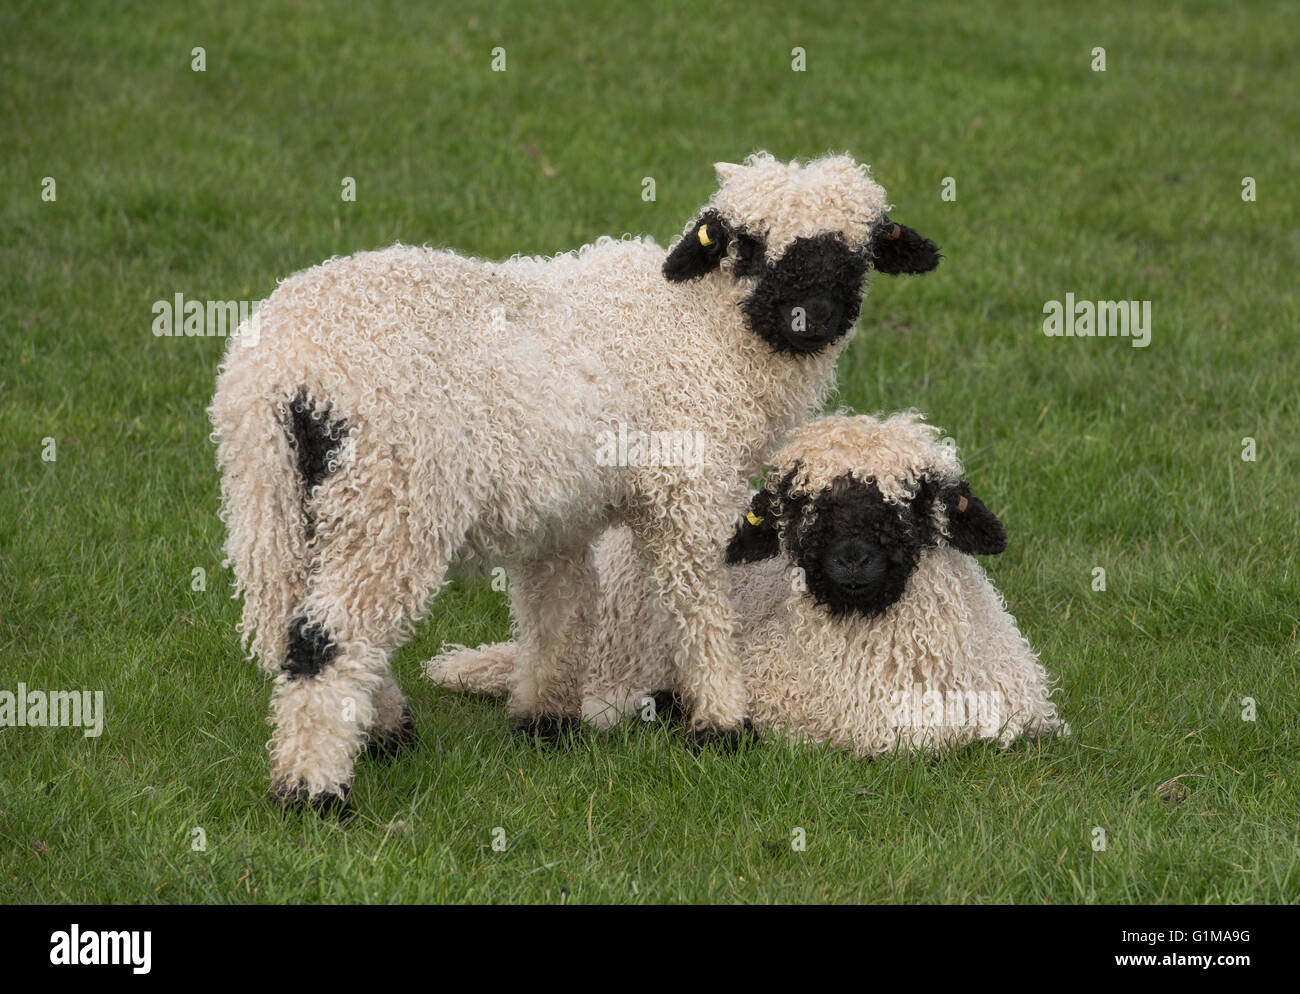 Valais Blacknose lambs in a grass field, Cheshire. UK Stock Photo